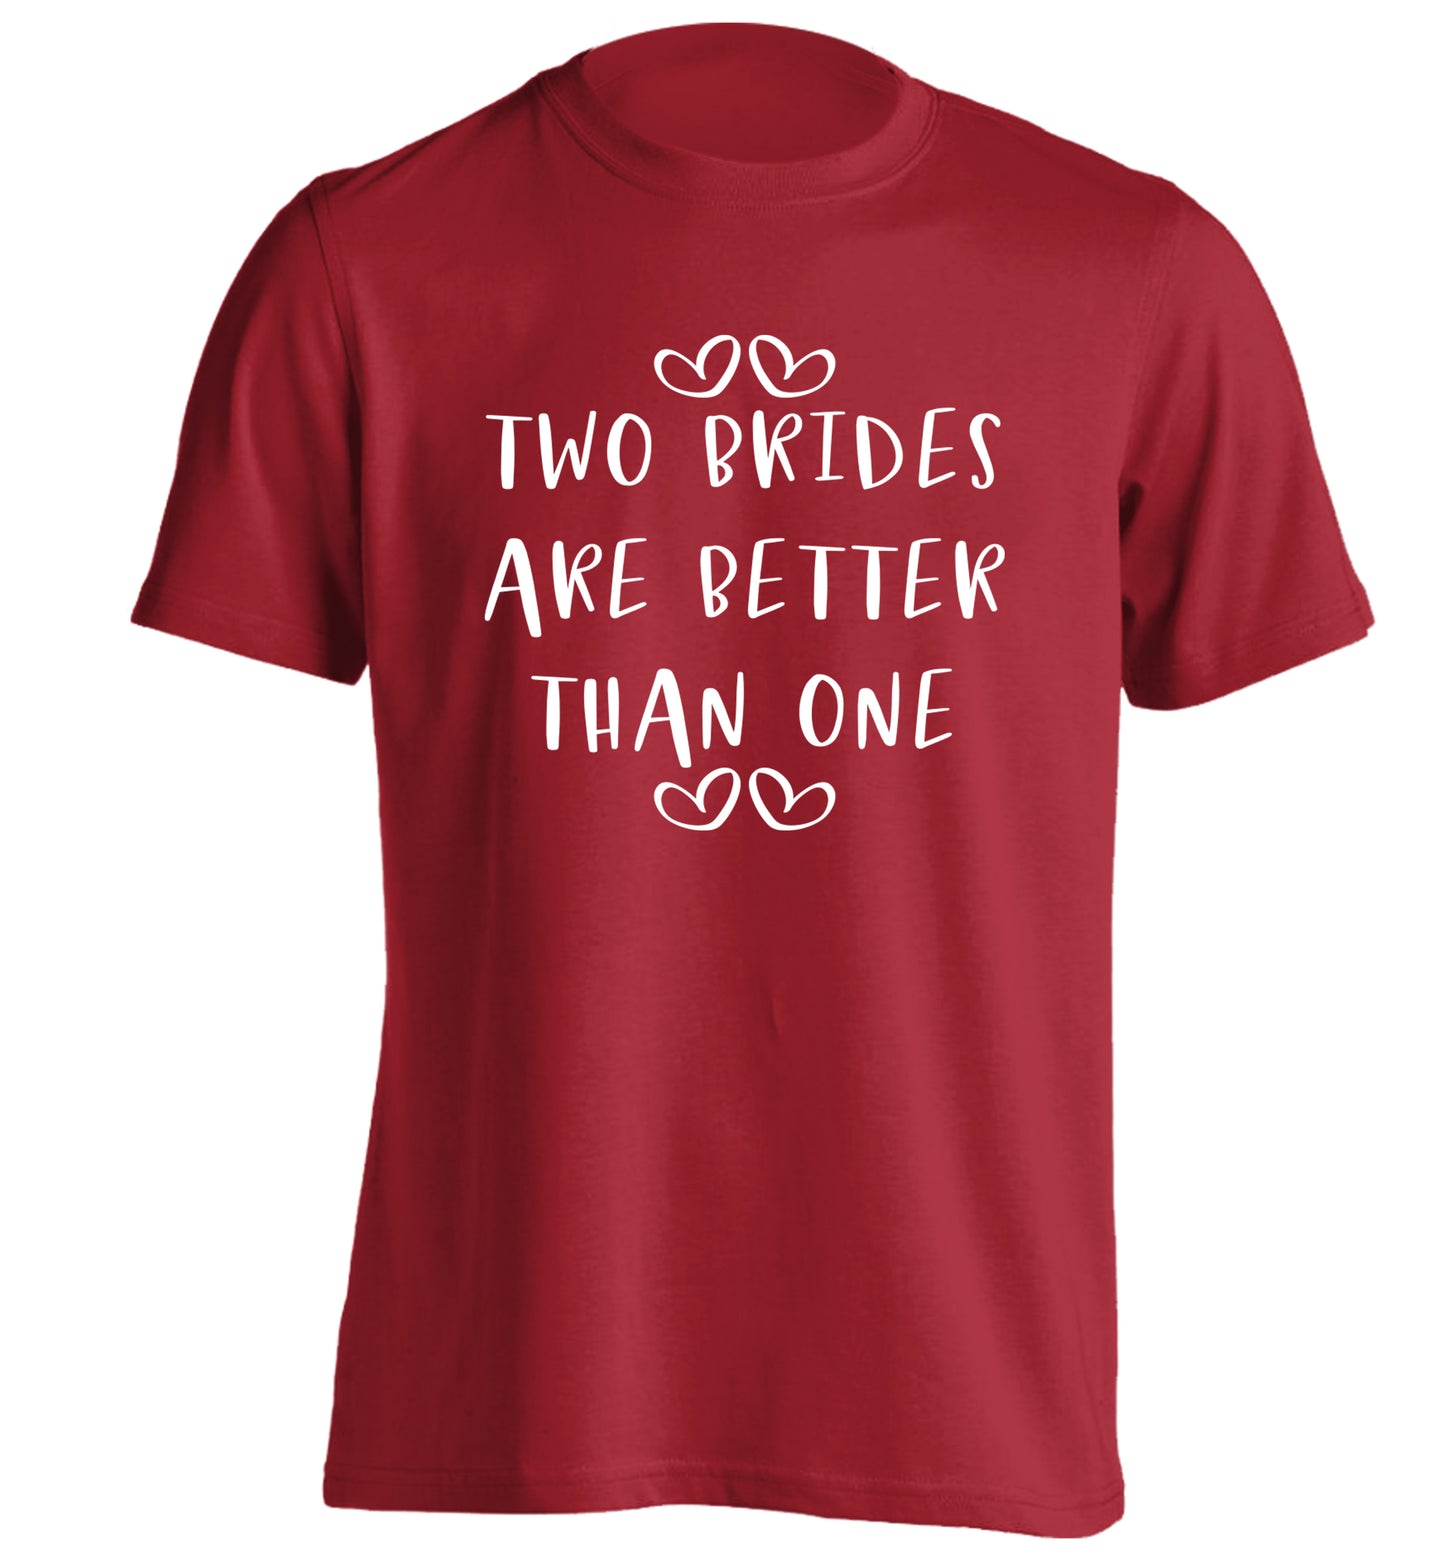 Two brides are better than one adults unisex red Tshirt 2XL